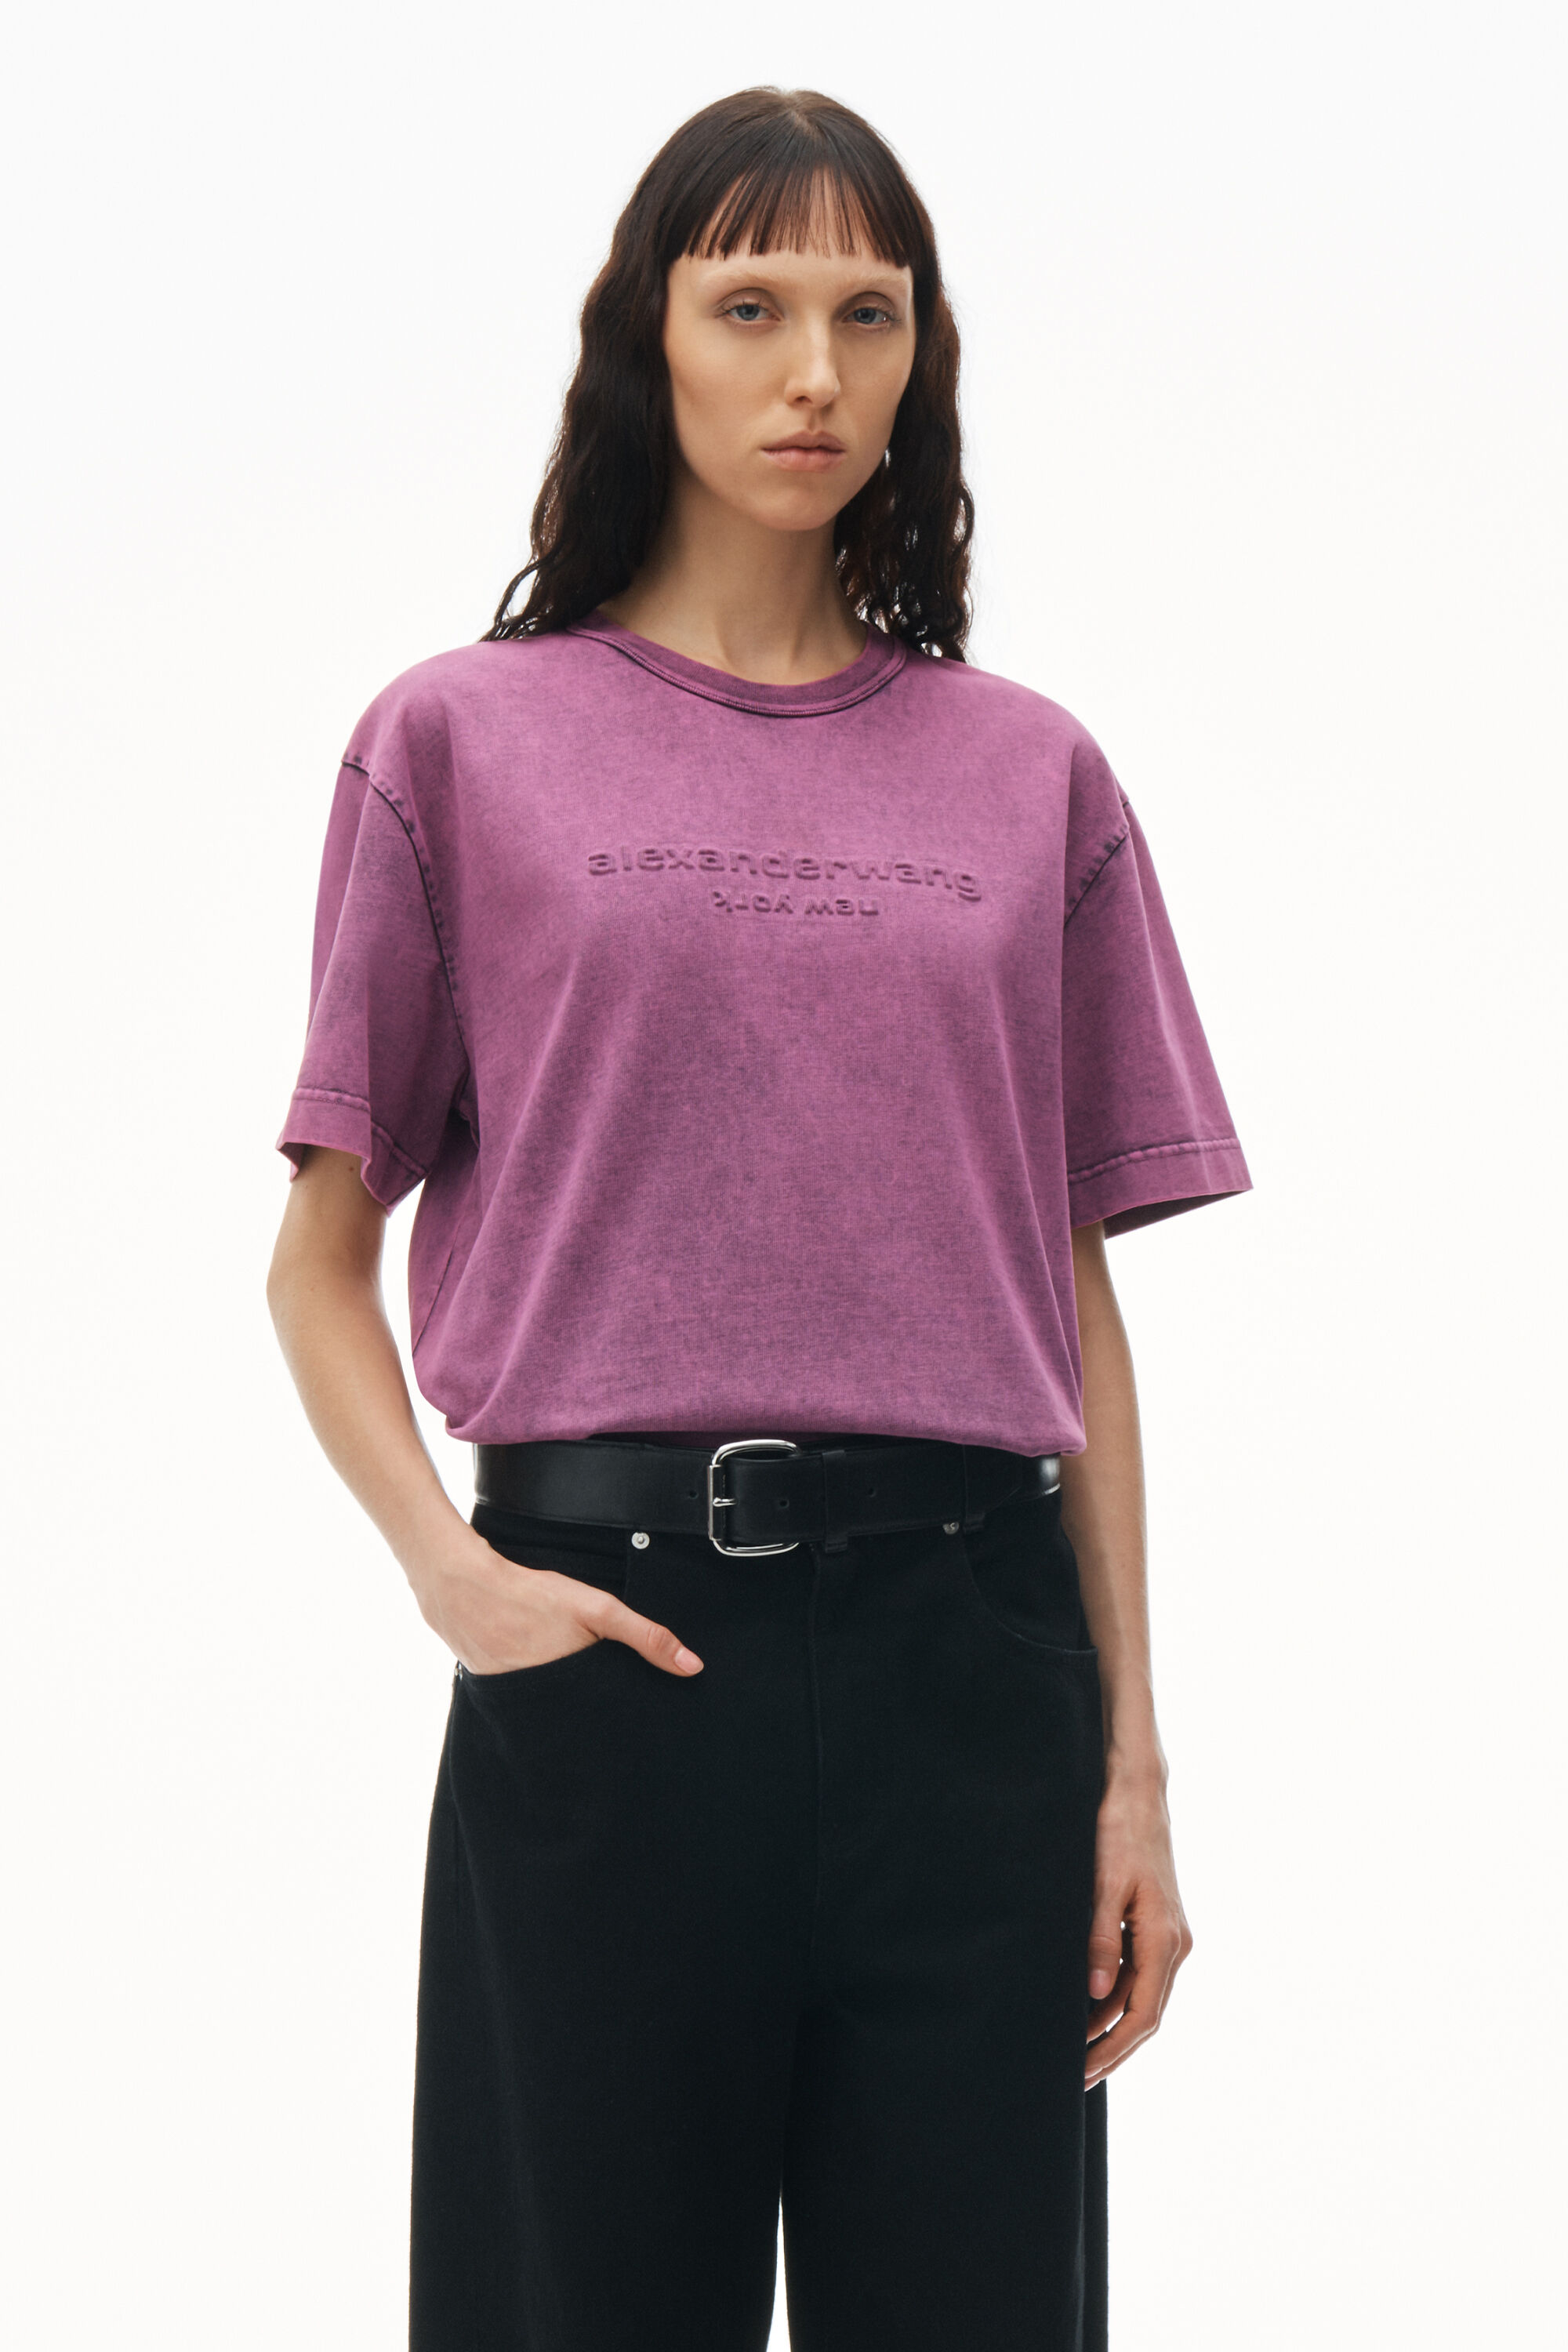 embossed logo tee in compact jersey in ACID CANDY PINK 